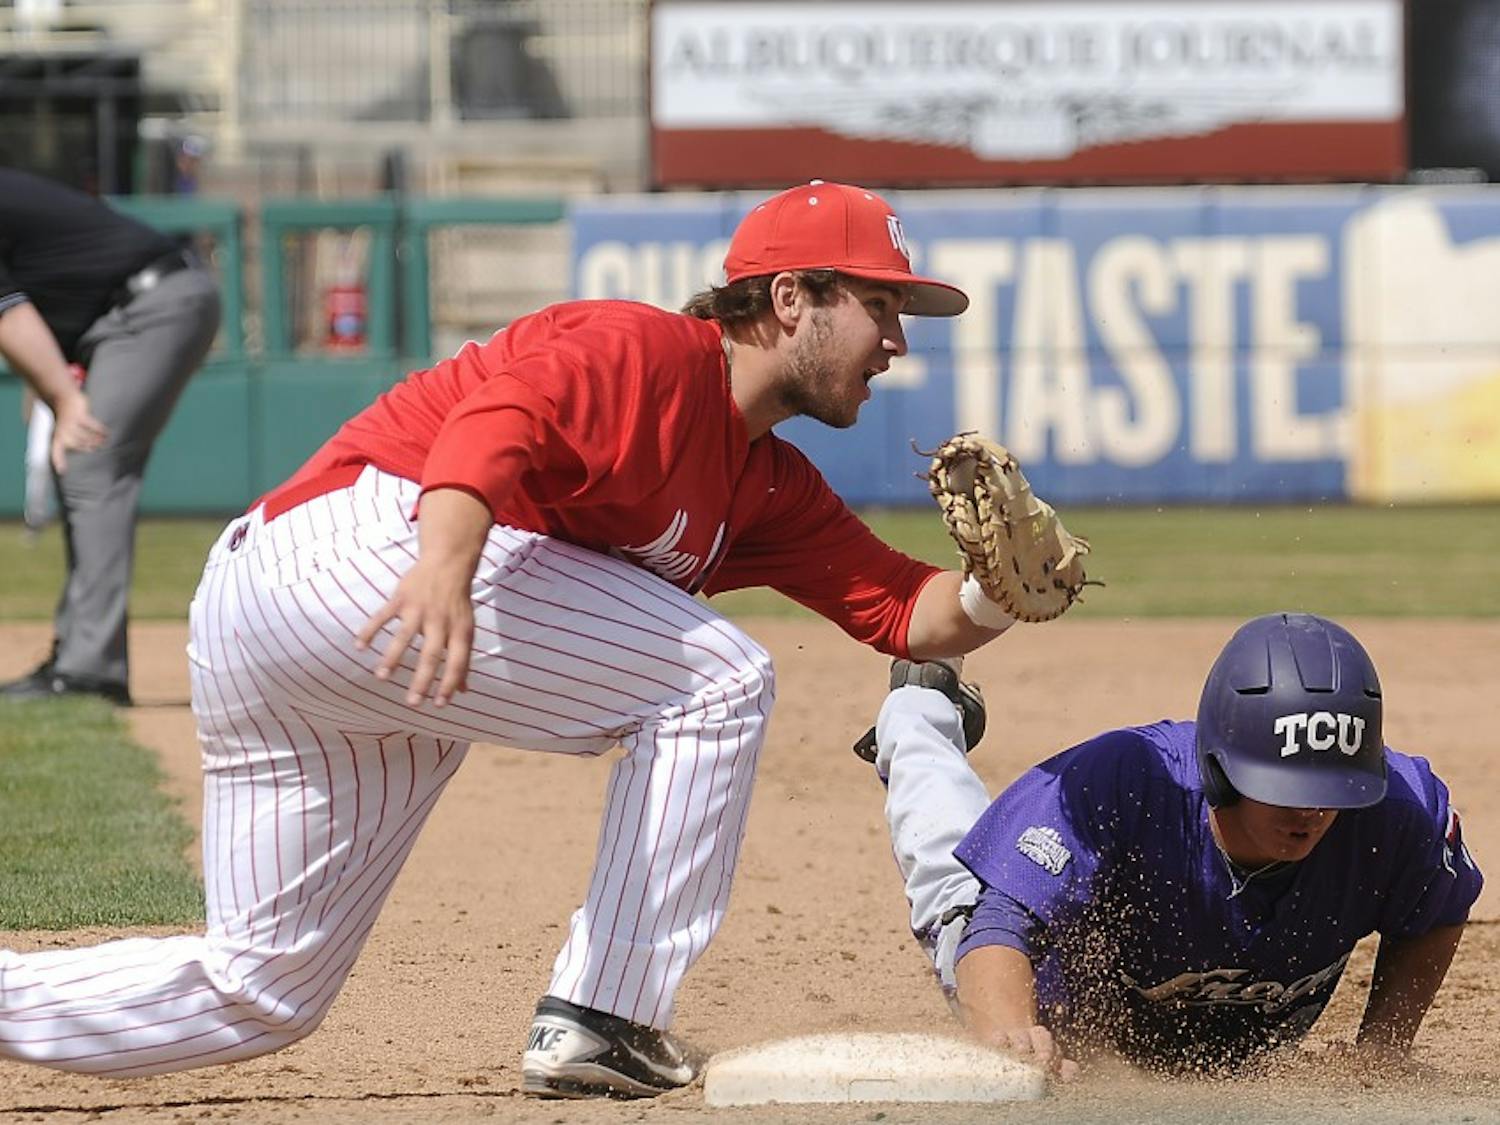 UNM first baseman DJ Peterson attempts to tag a TCU runner out at first base. The Lobos beat TCU by 12-7 at Isotopes Park Sunday afternoon. 